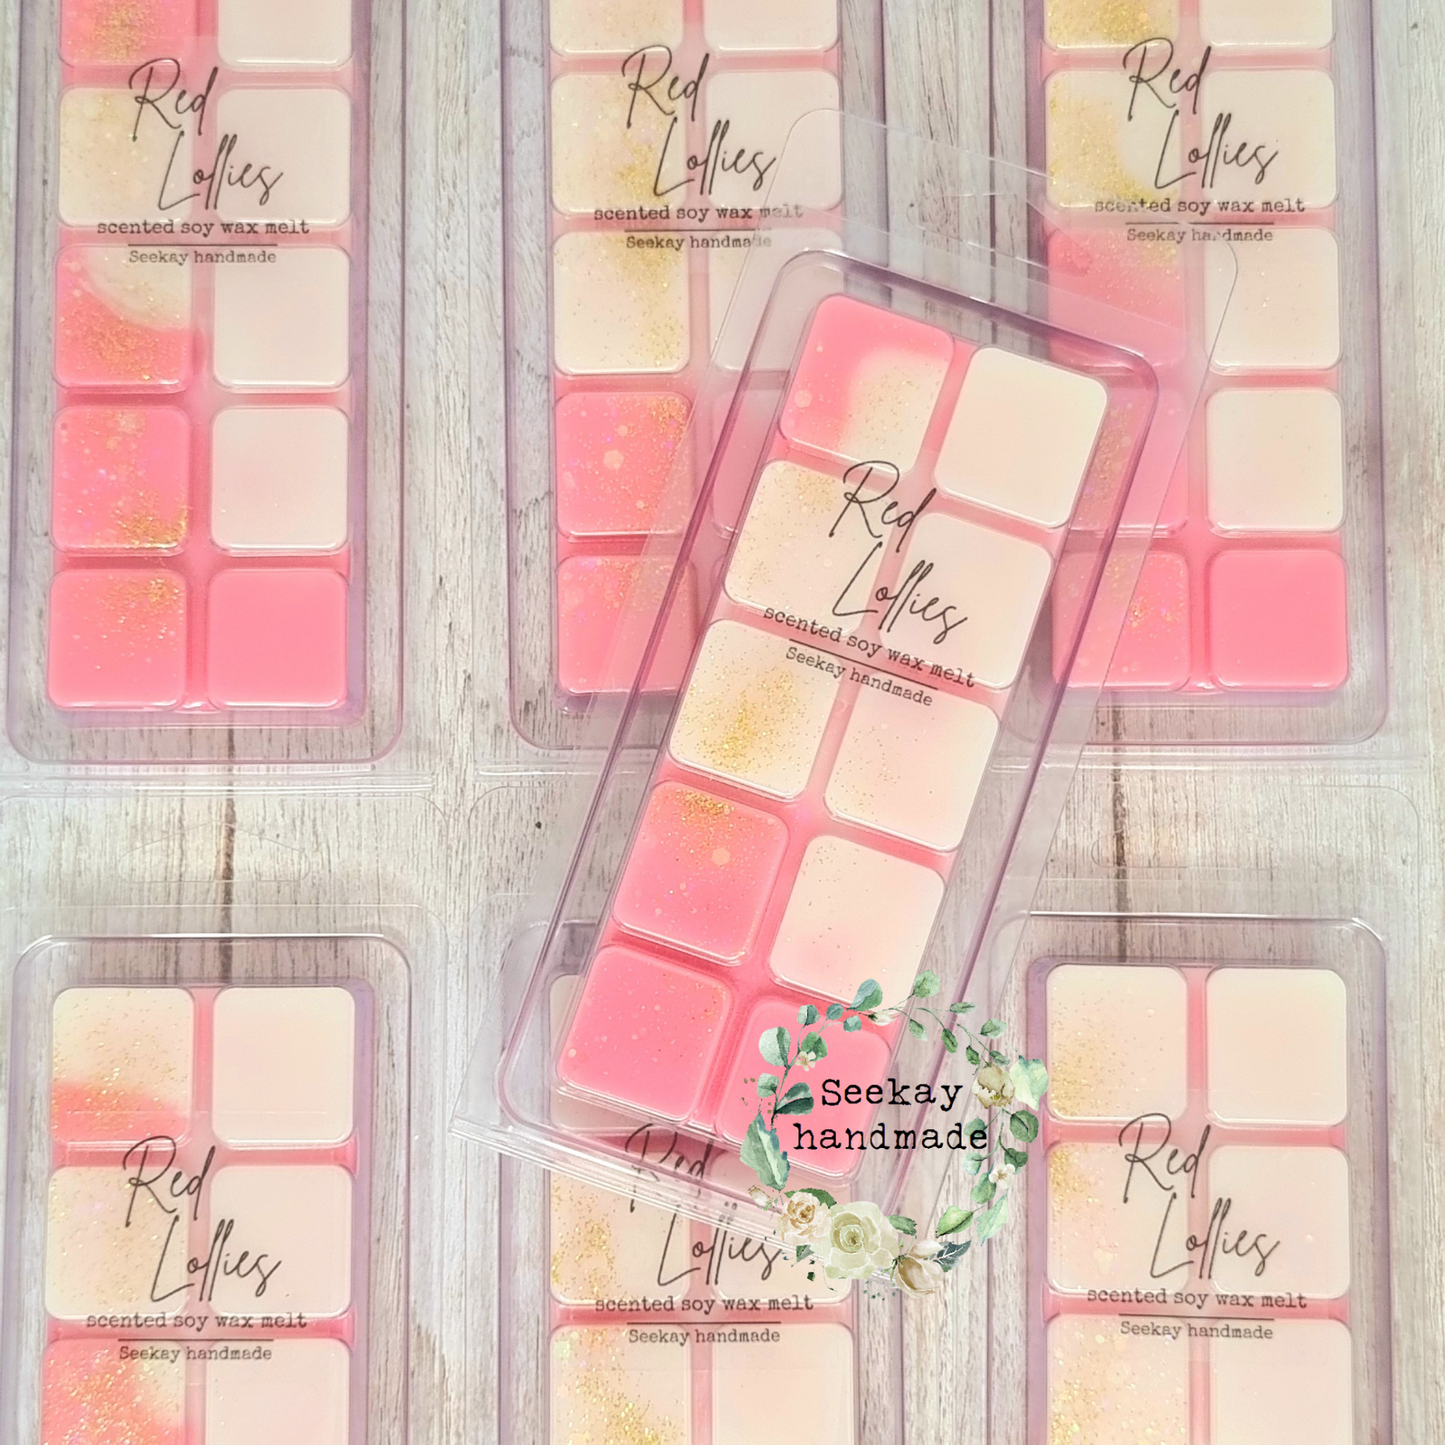 Red Lollies scented soy wax melt